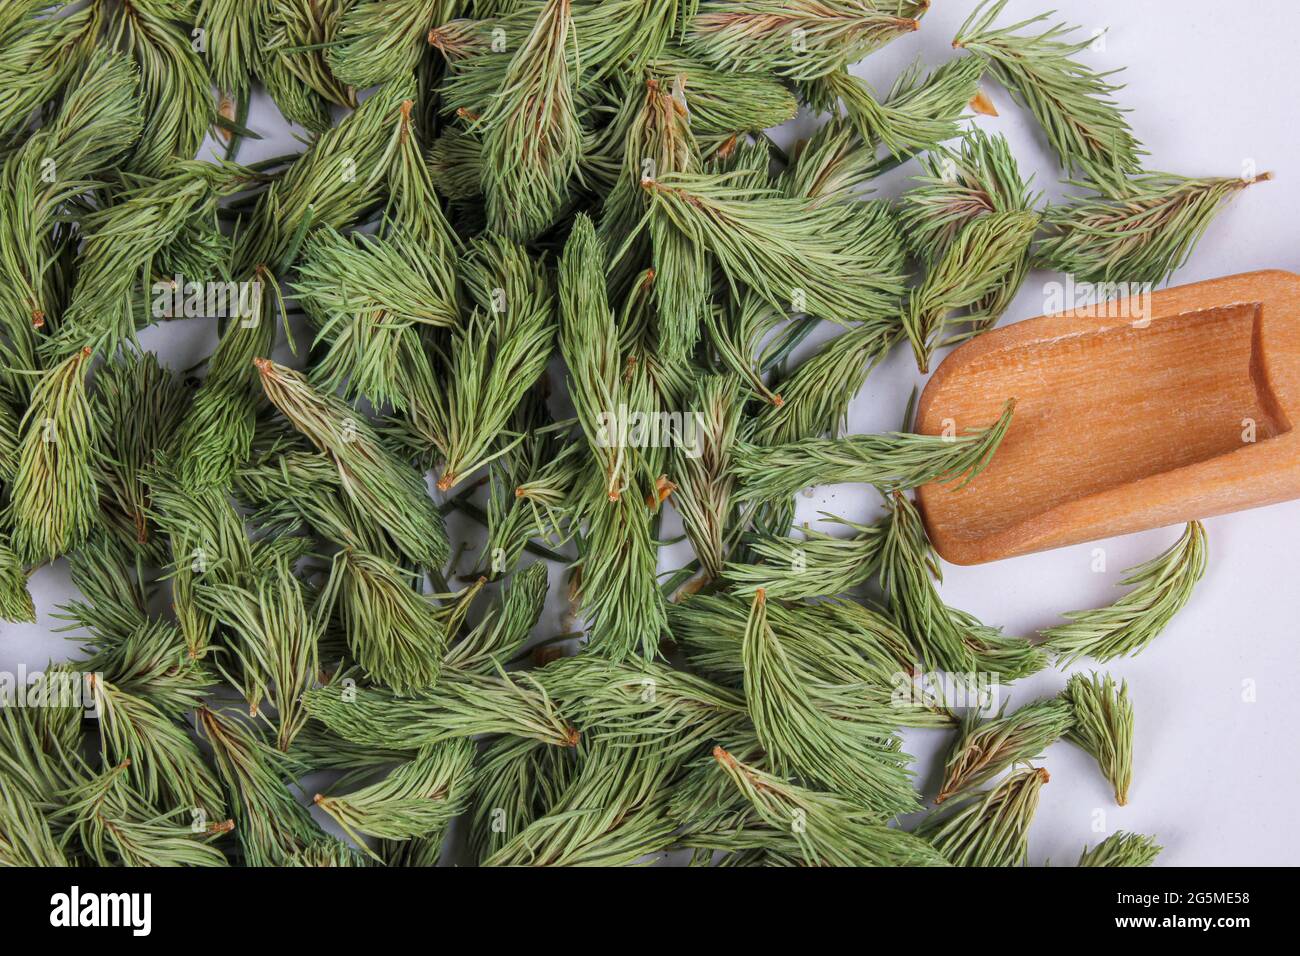 Dried young shoots of spruce prepare for tea. Remedy for cough and asthma. Homeopathy and natural folk medicine. Close up. Flat lay. Stock Photo